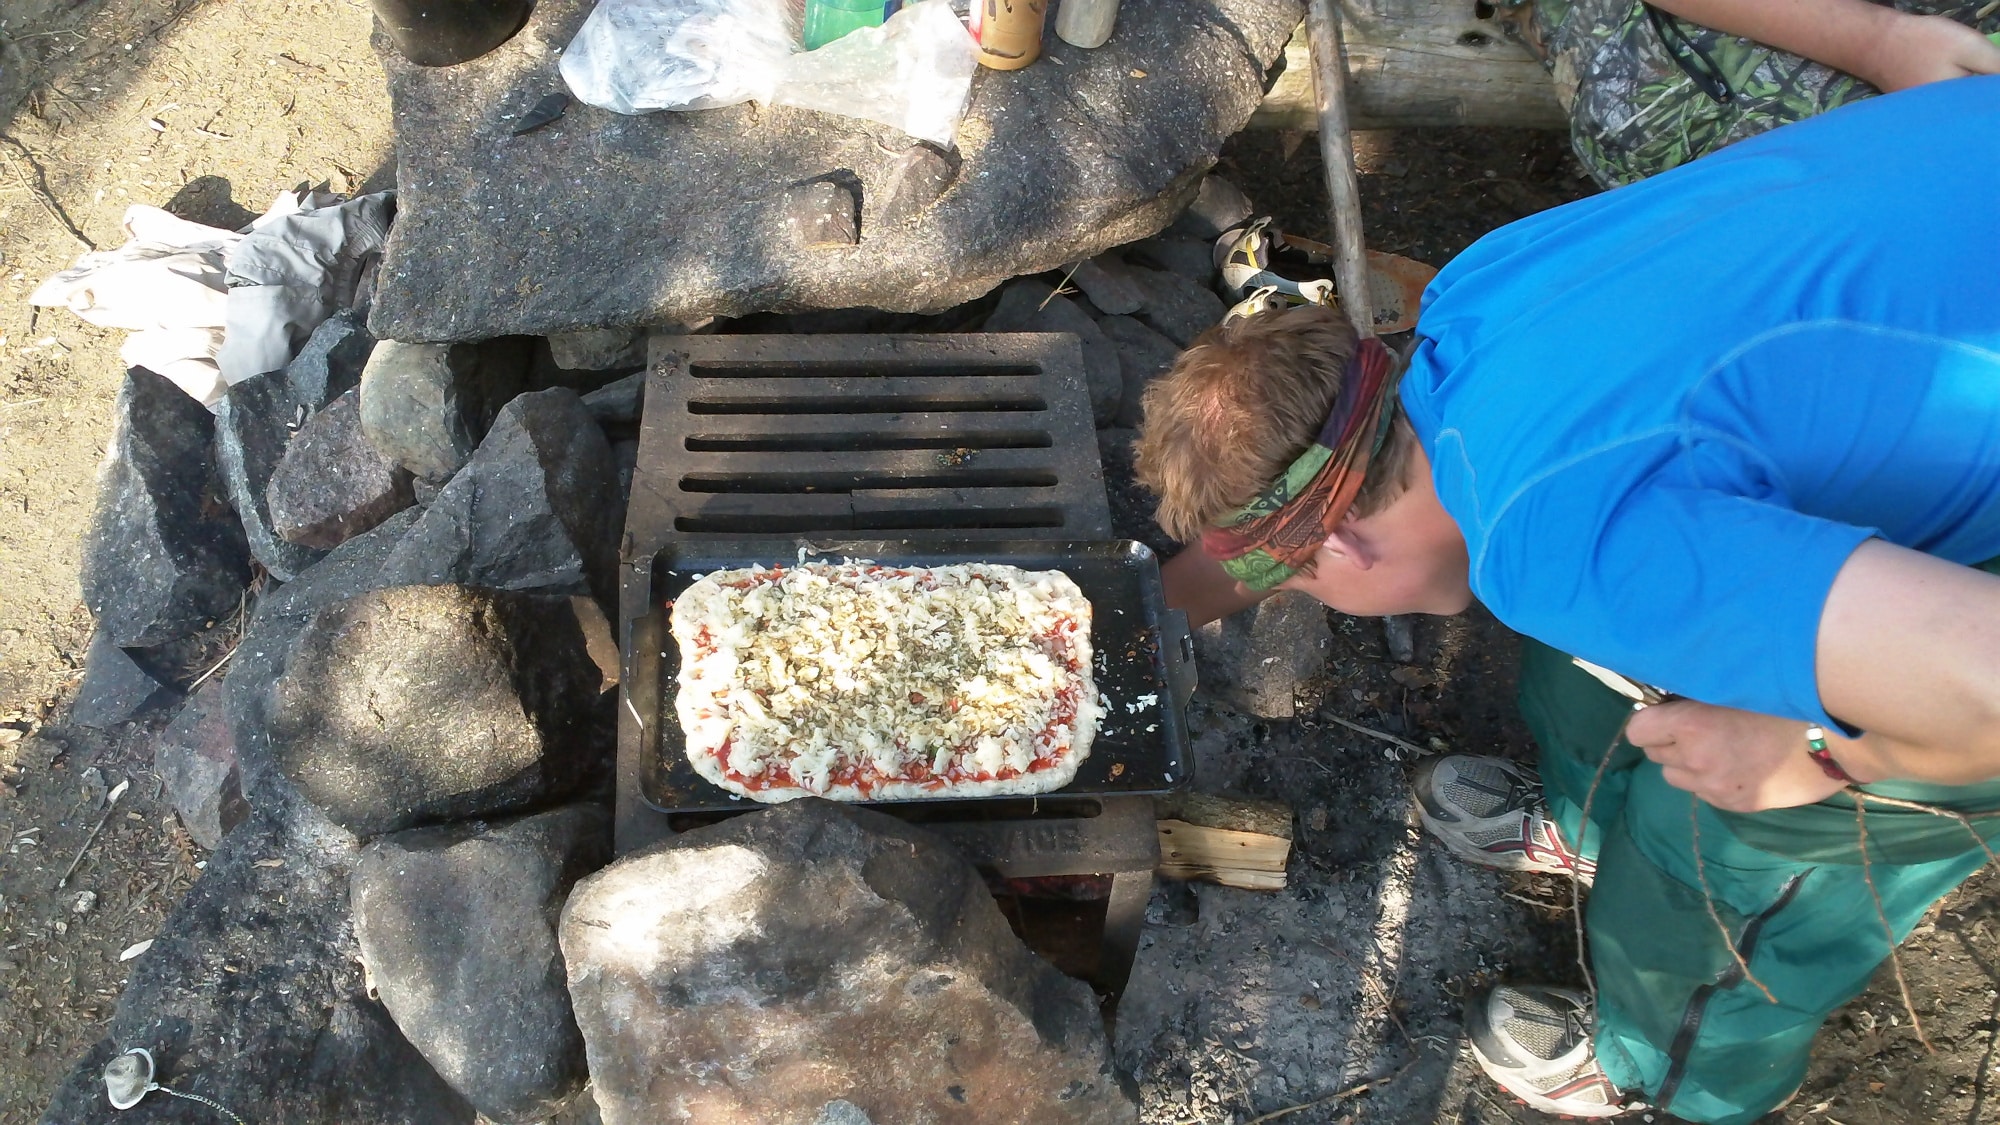 Pizza Cooking Over The Fire In The Bwca